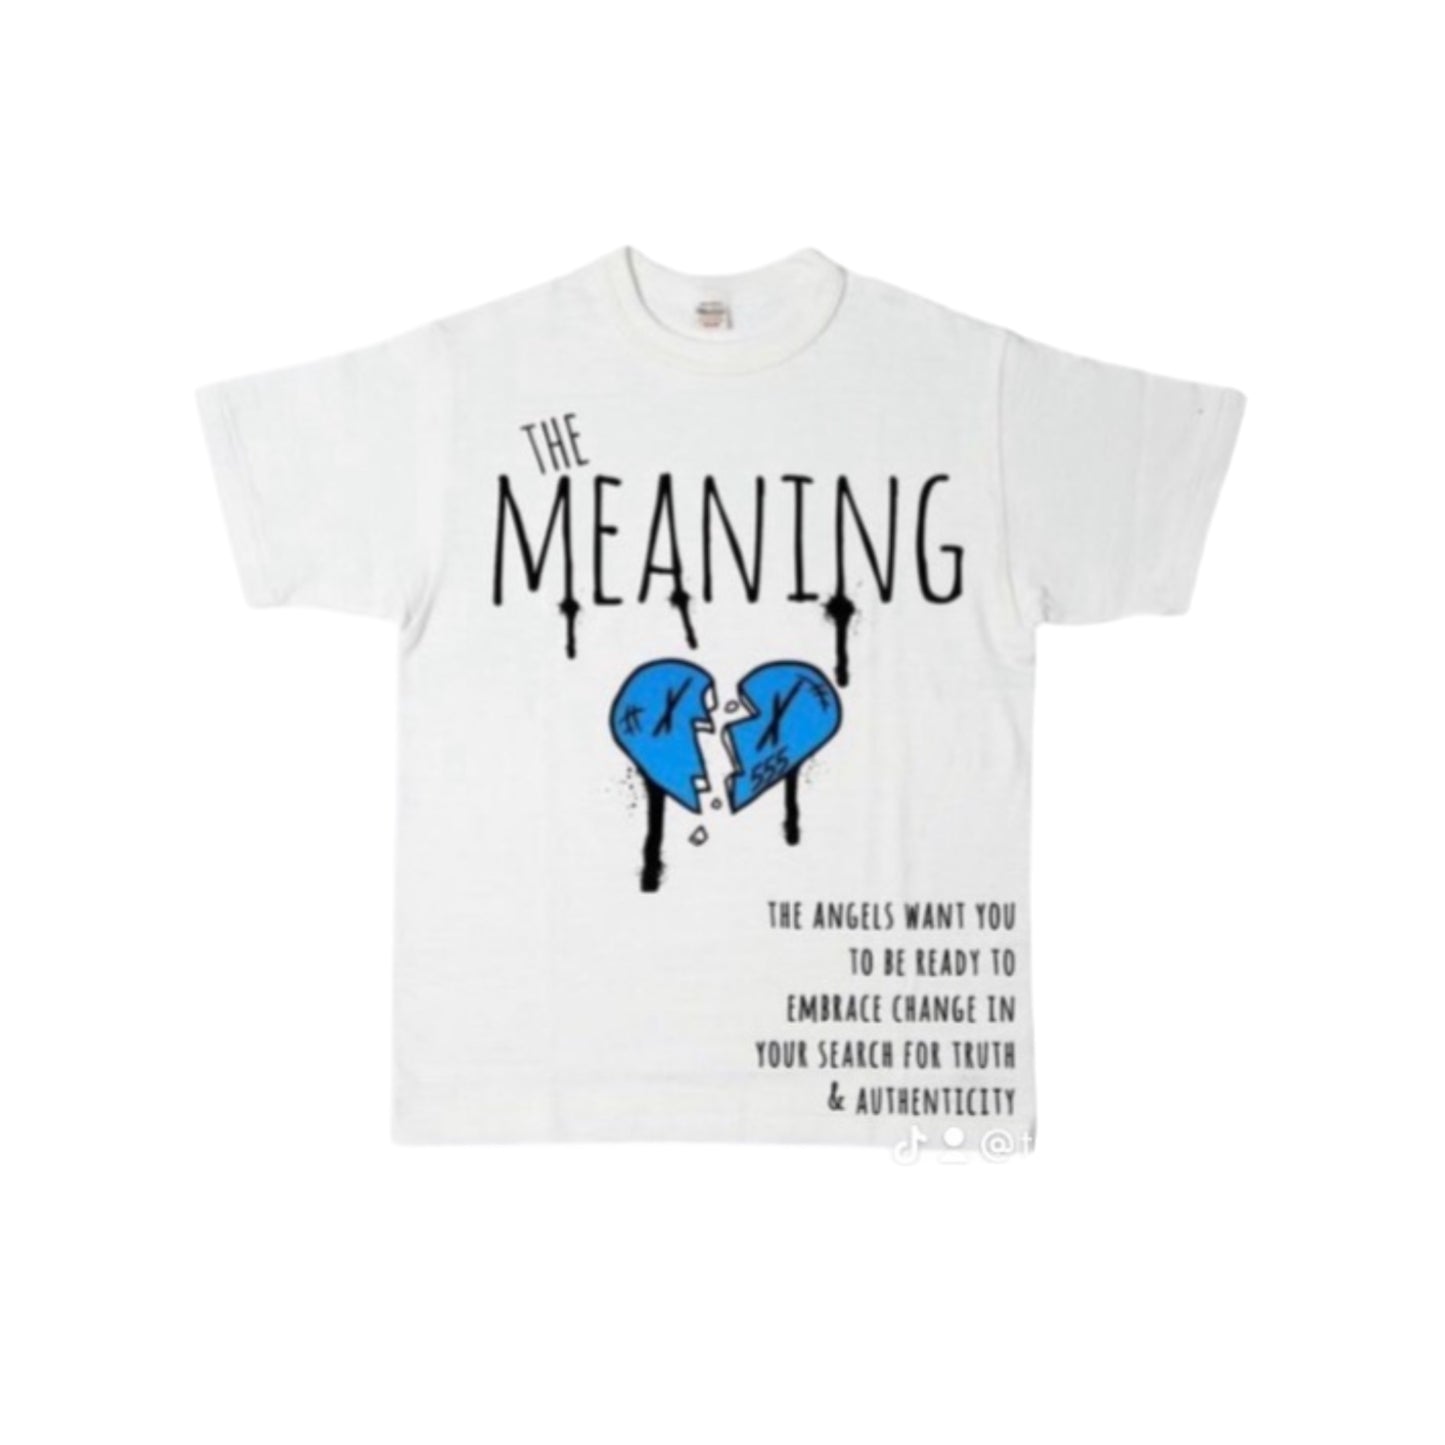 The meaning Tshirts